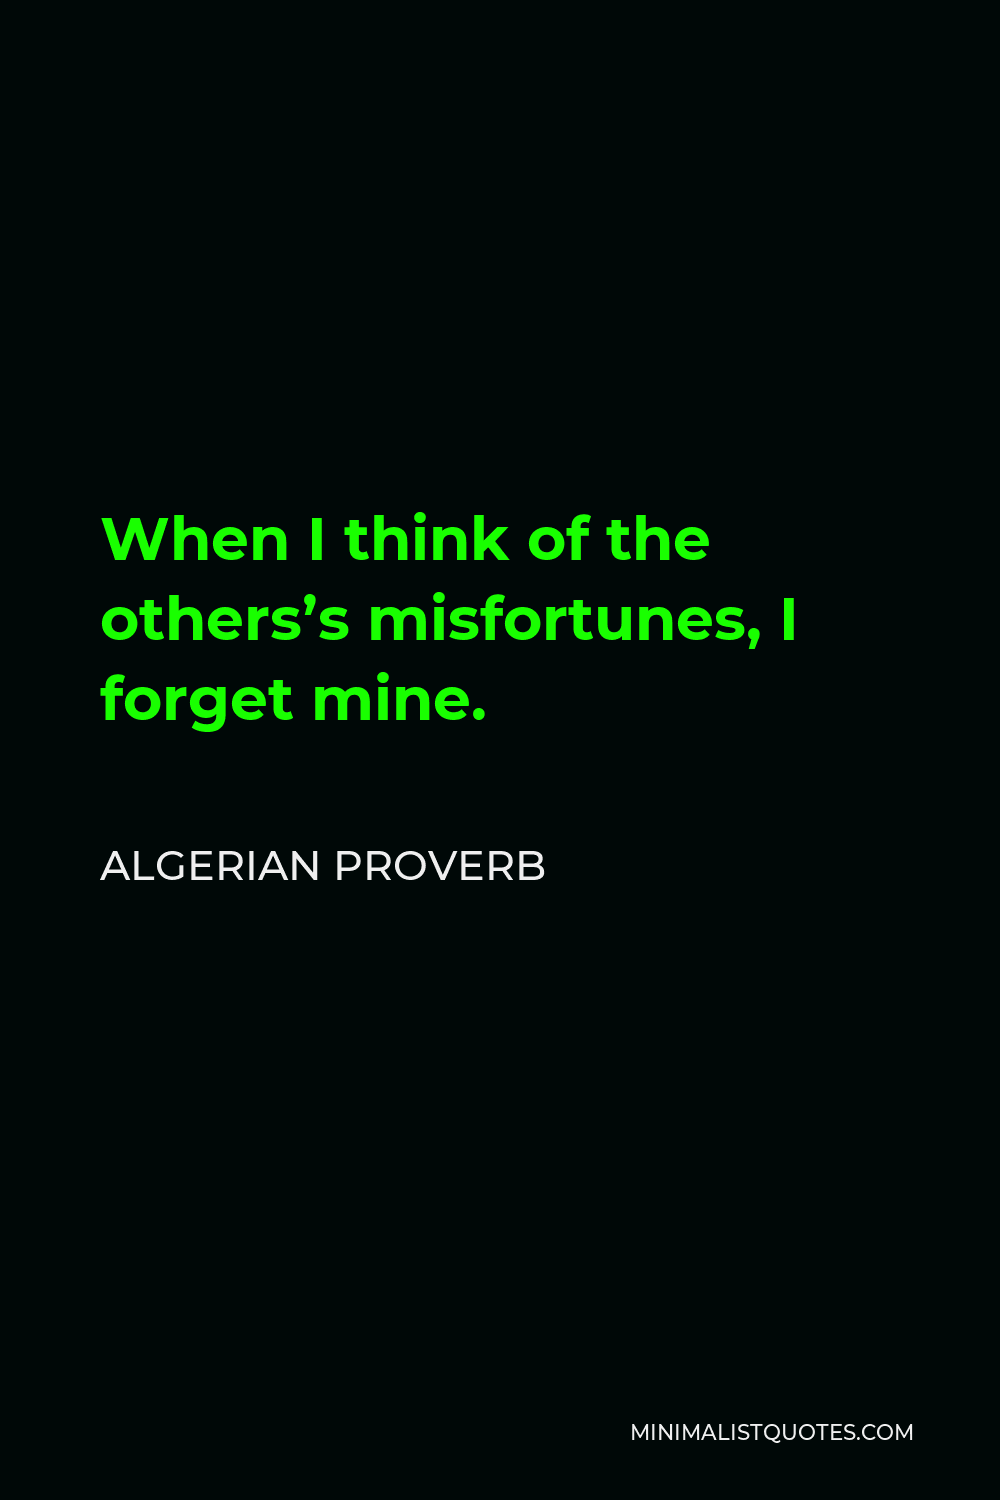 Algerian Proverb Quote - When I think of the others’s misfortunes, I forget mine.